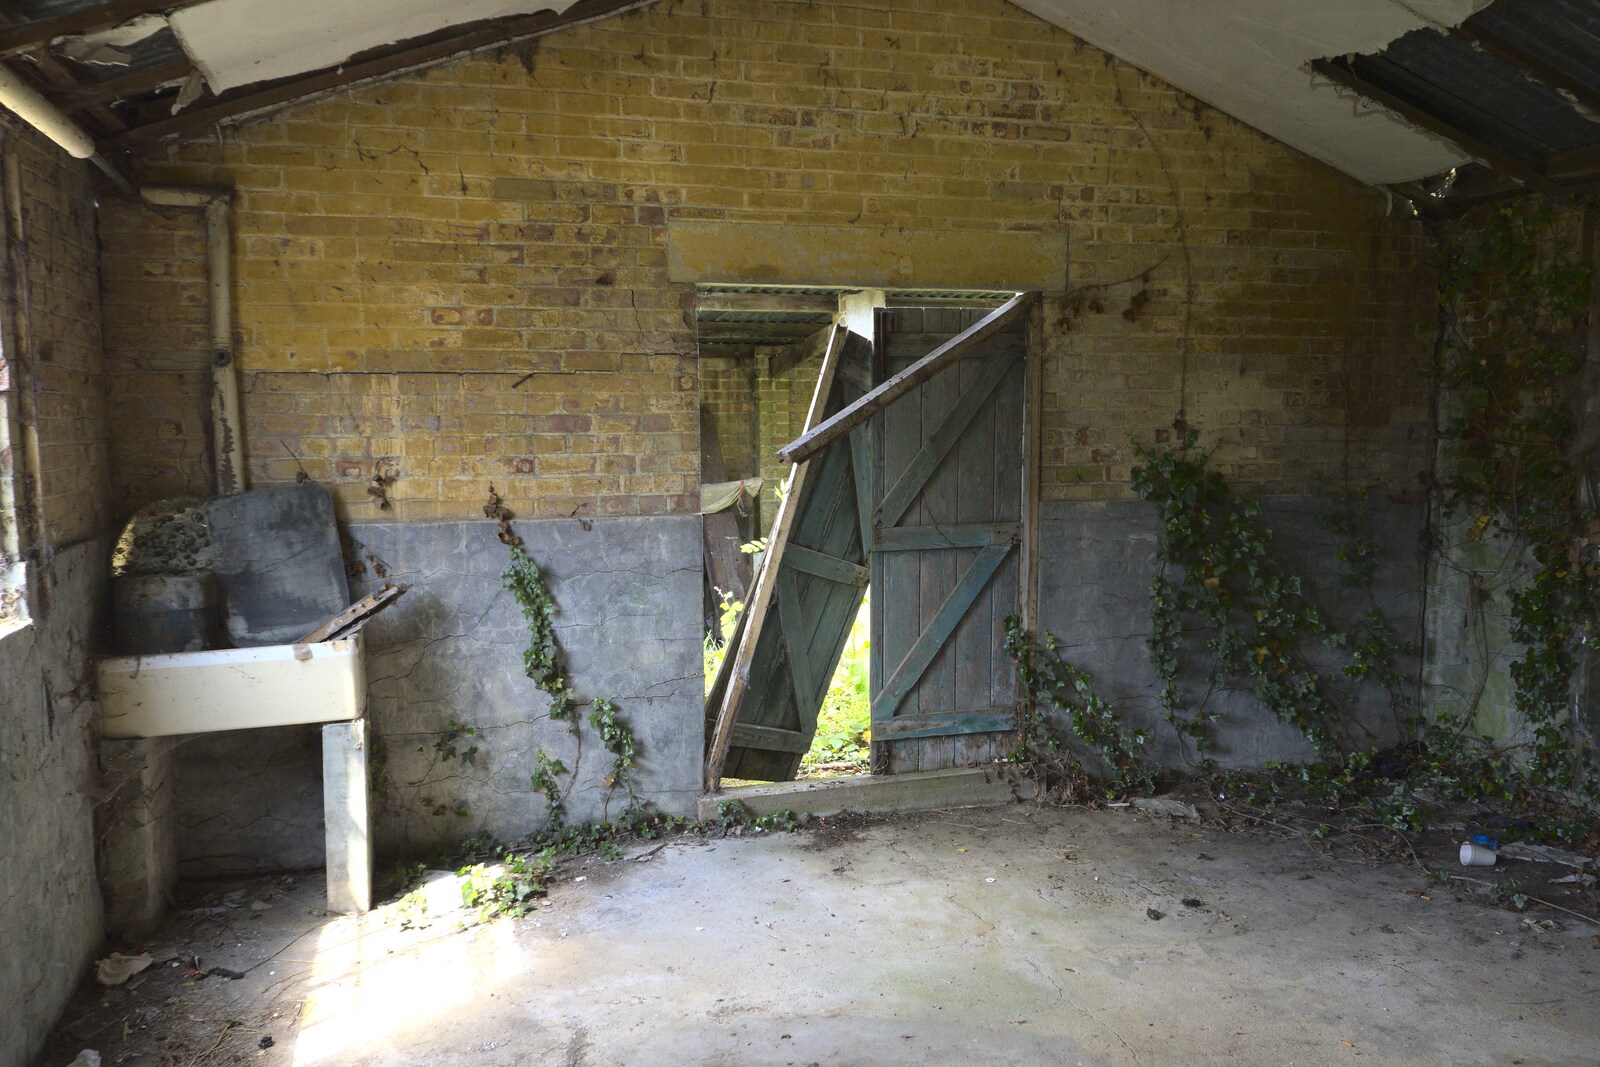 Ivy grows all over the inside walls from A 1940s Timewarp, Site 4, Bungay Airfield, Flixton, Suffolk - 9th June 2022